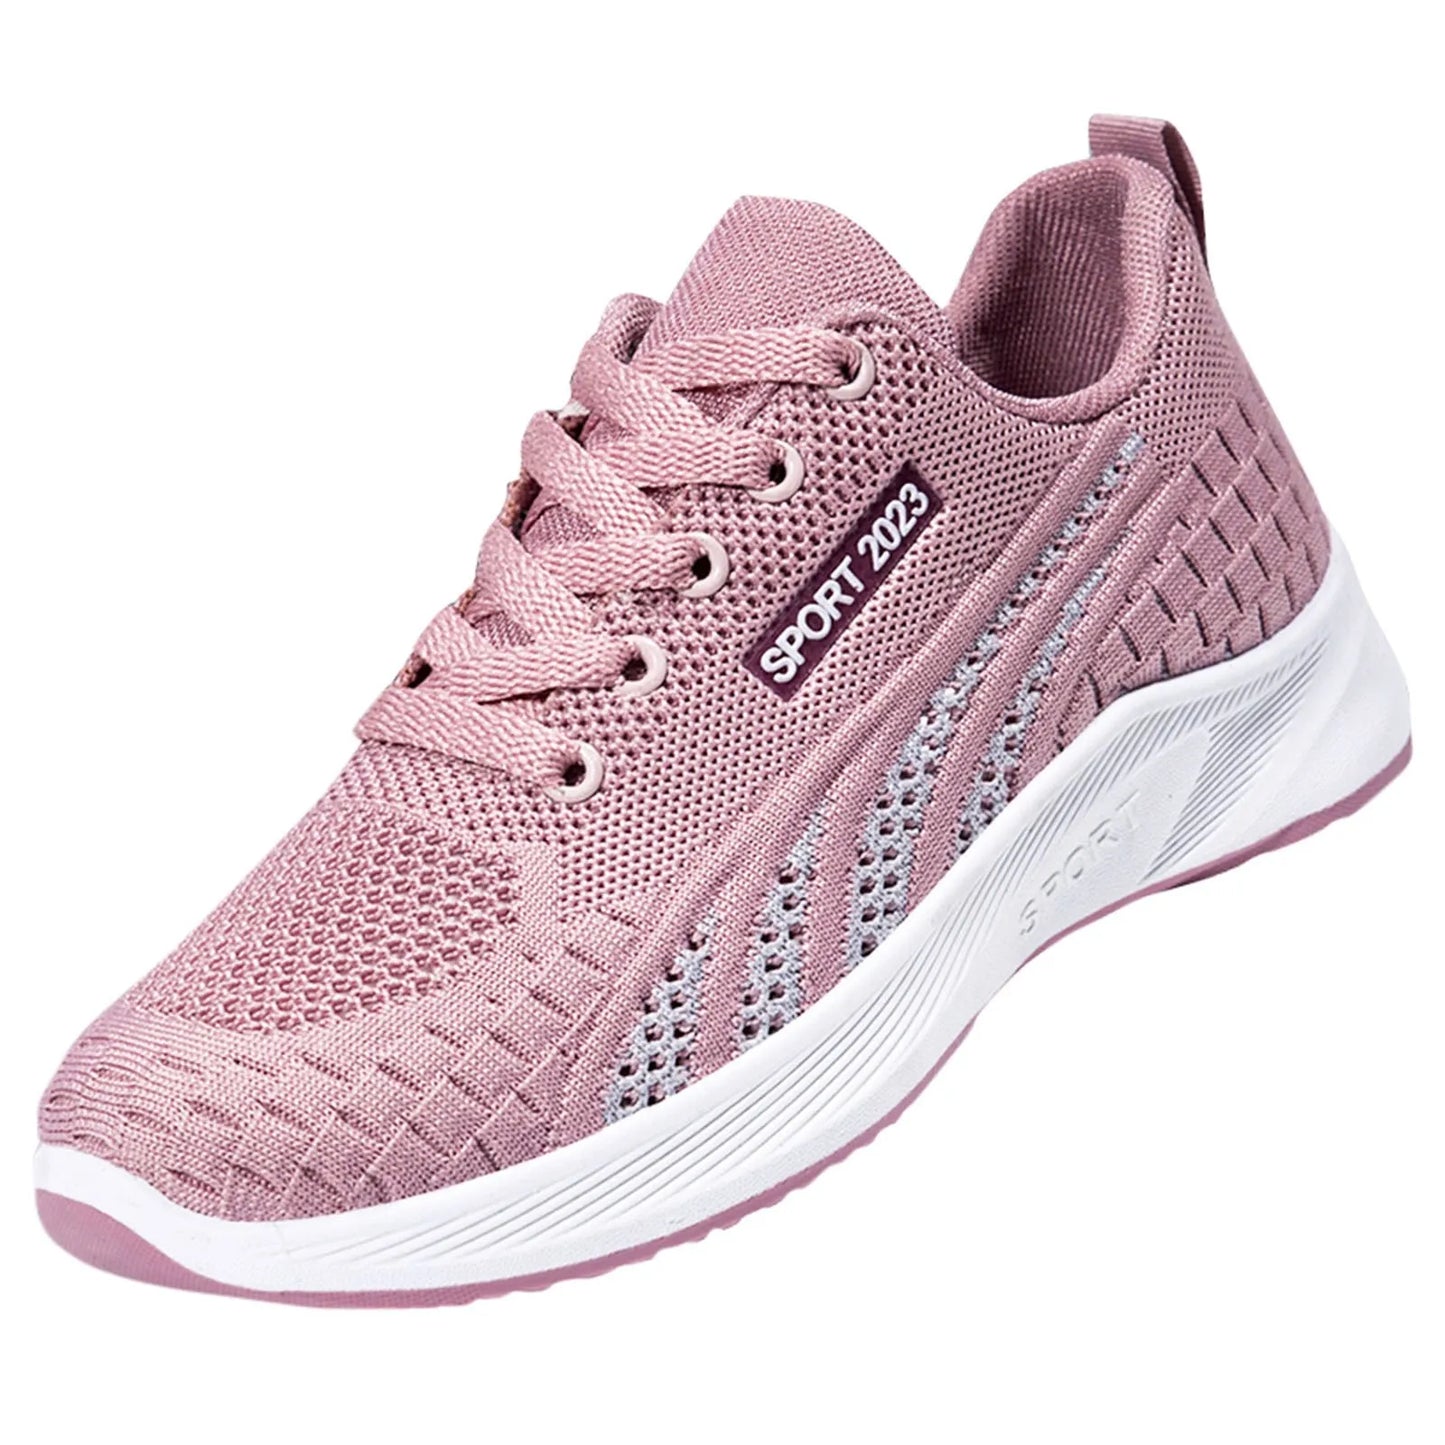 Tennis Shoes For Women Running Lace Up Round Toe Sports Shoes/Woman Platform Sneakers Ladies Shoes